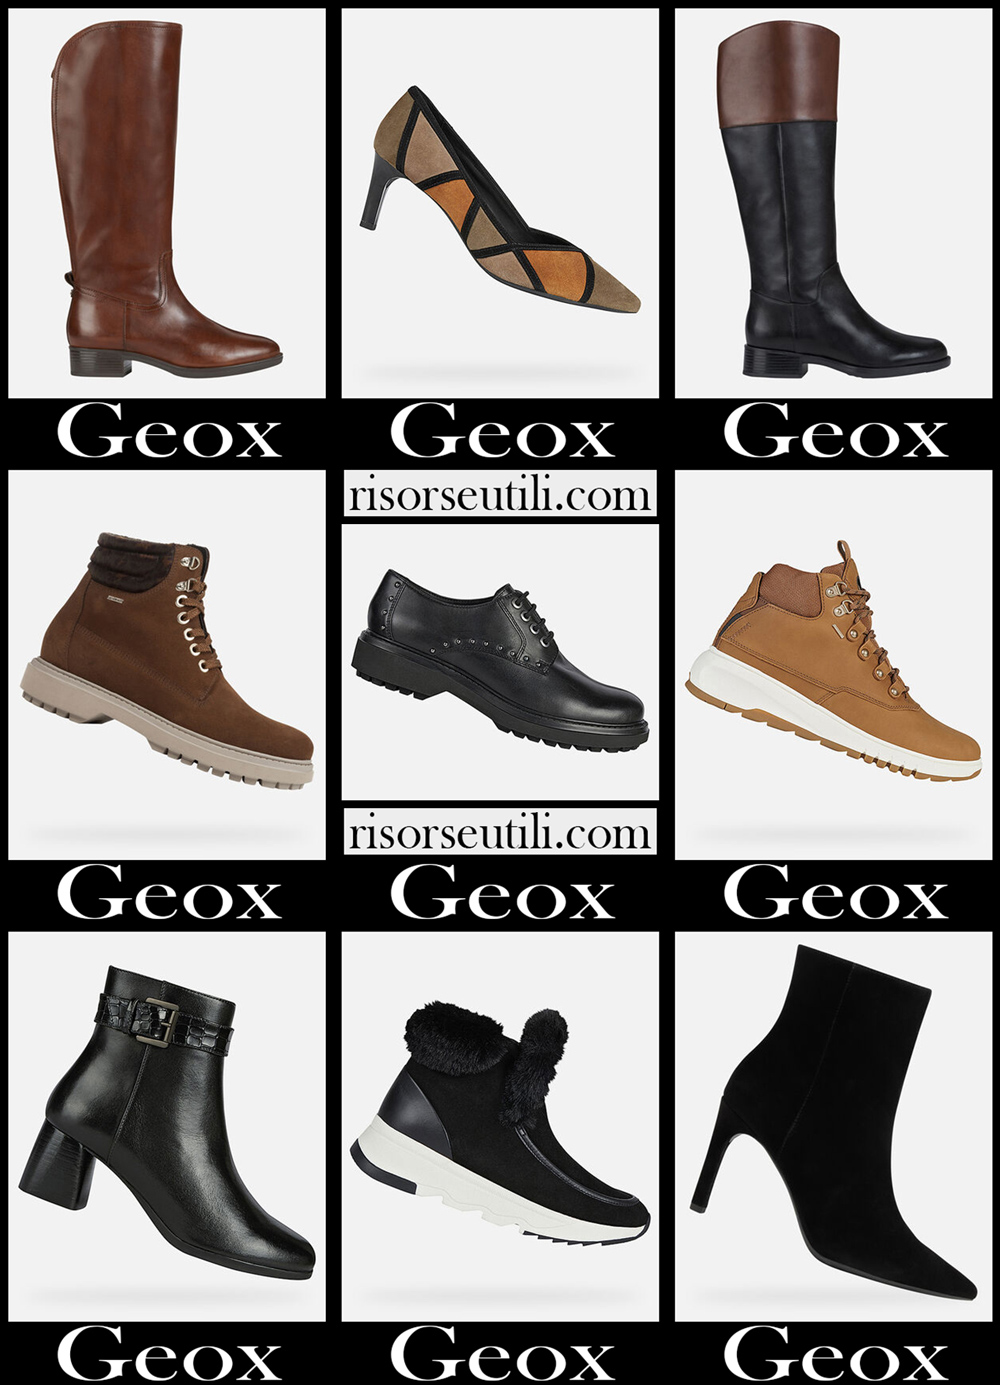 Geox shoes 20 2021 fall winter womens collection